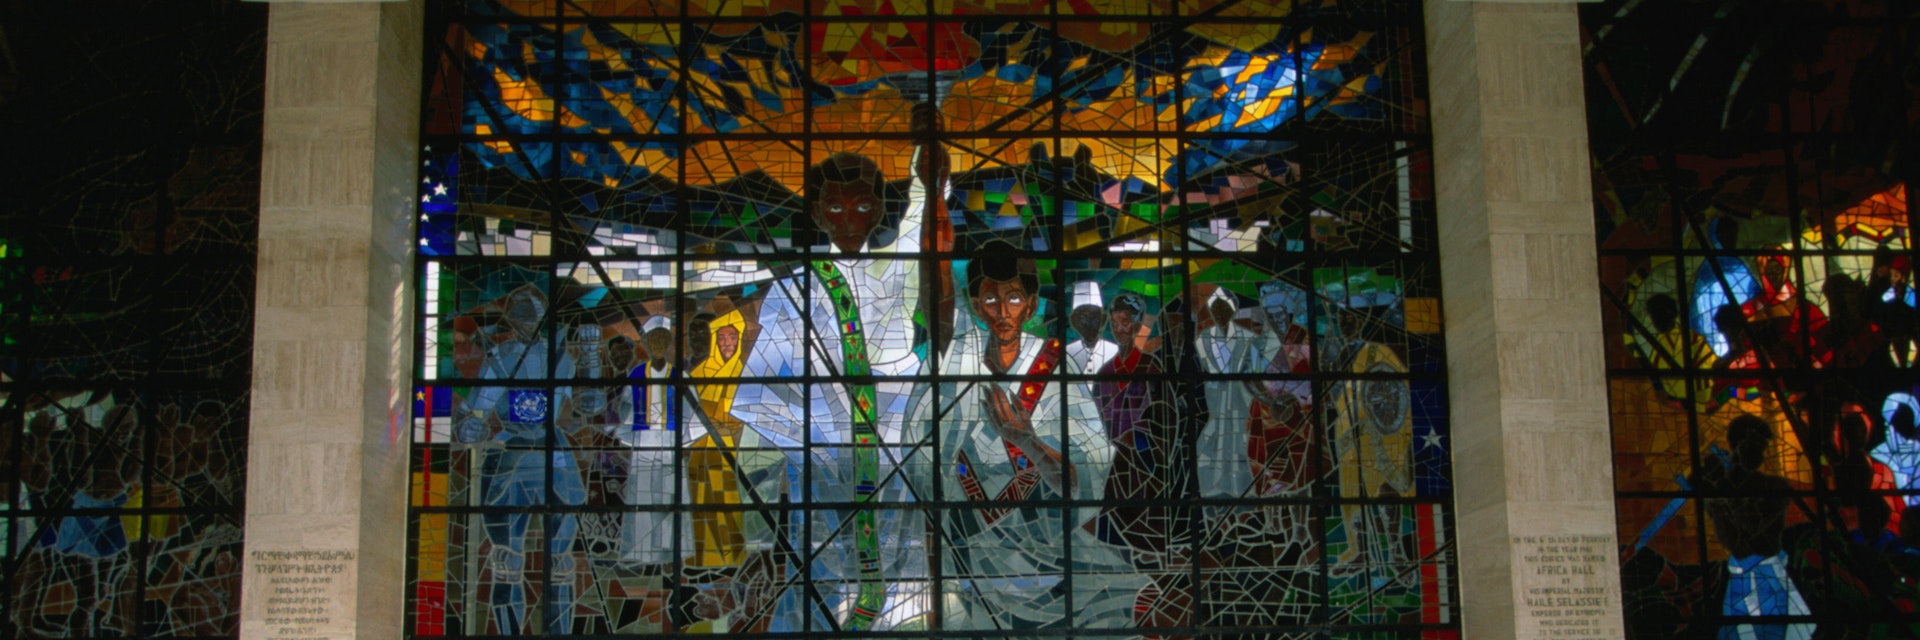 Interior of  Africa Hall, the seat of the Organisation of African Unity, and home to one of the largest stained-glass window in the world, designed by local artist Afewerk Tekle